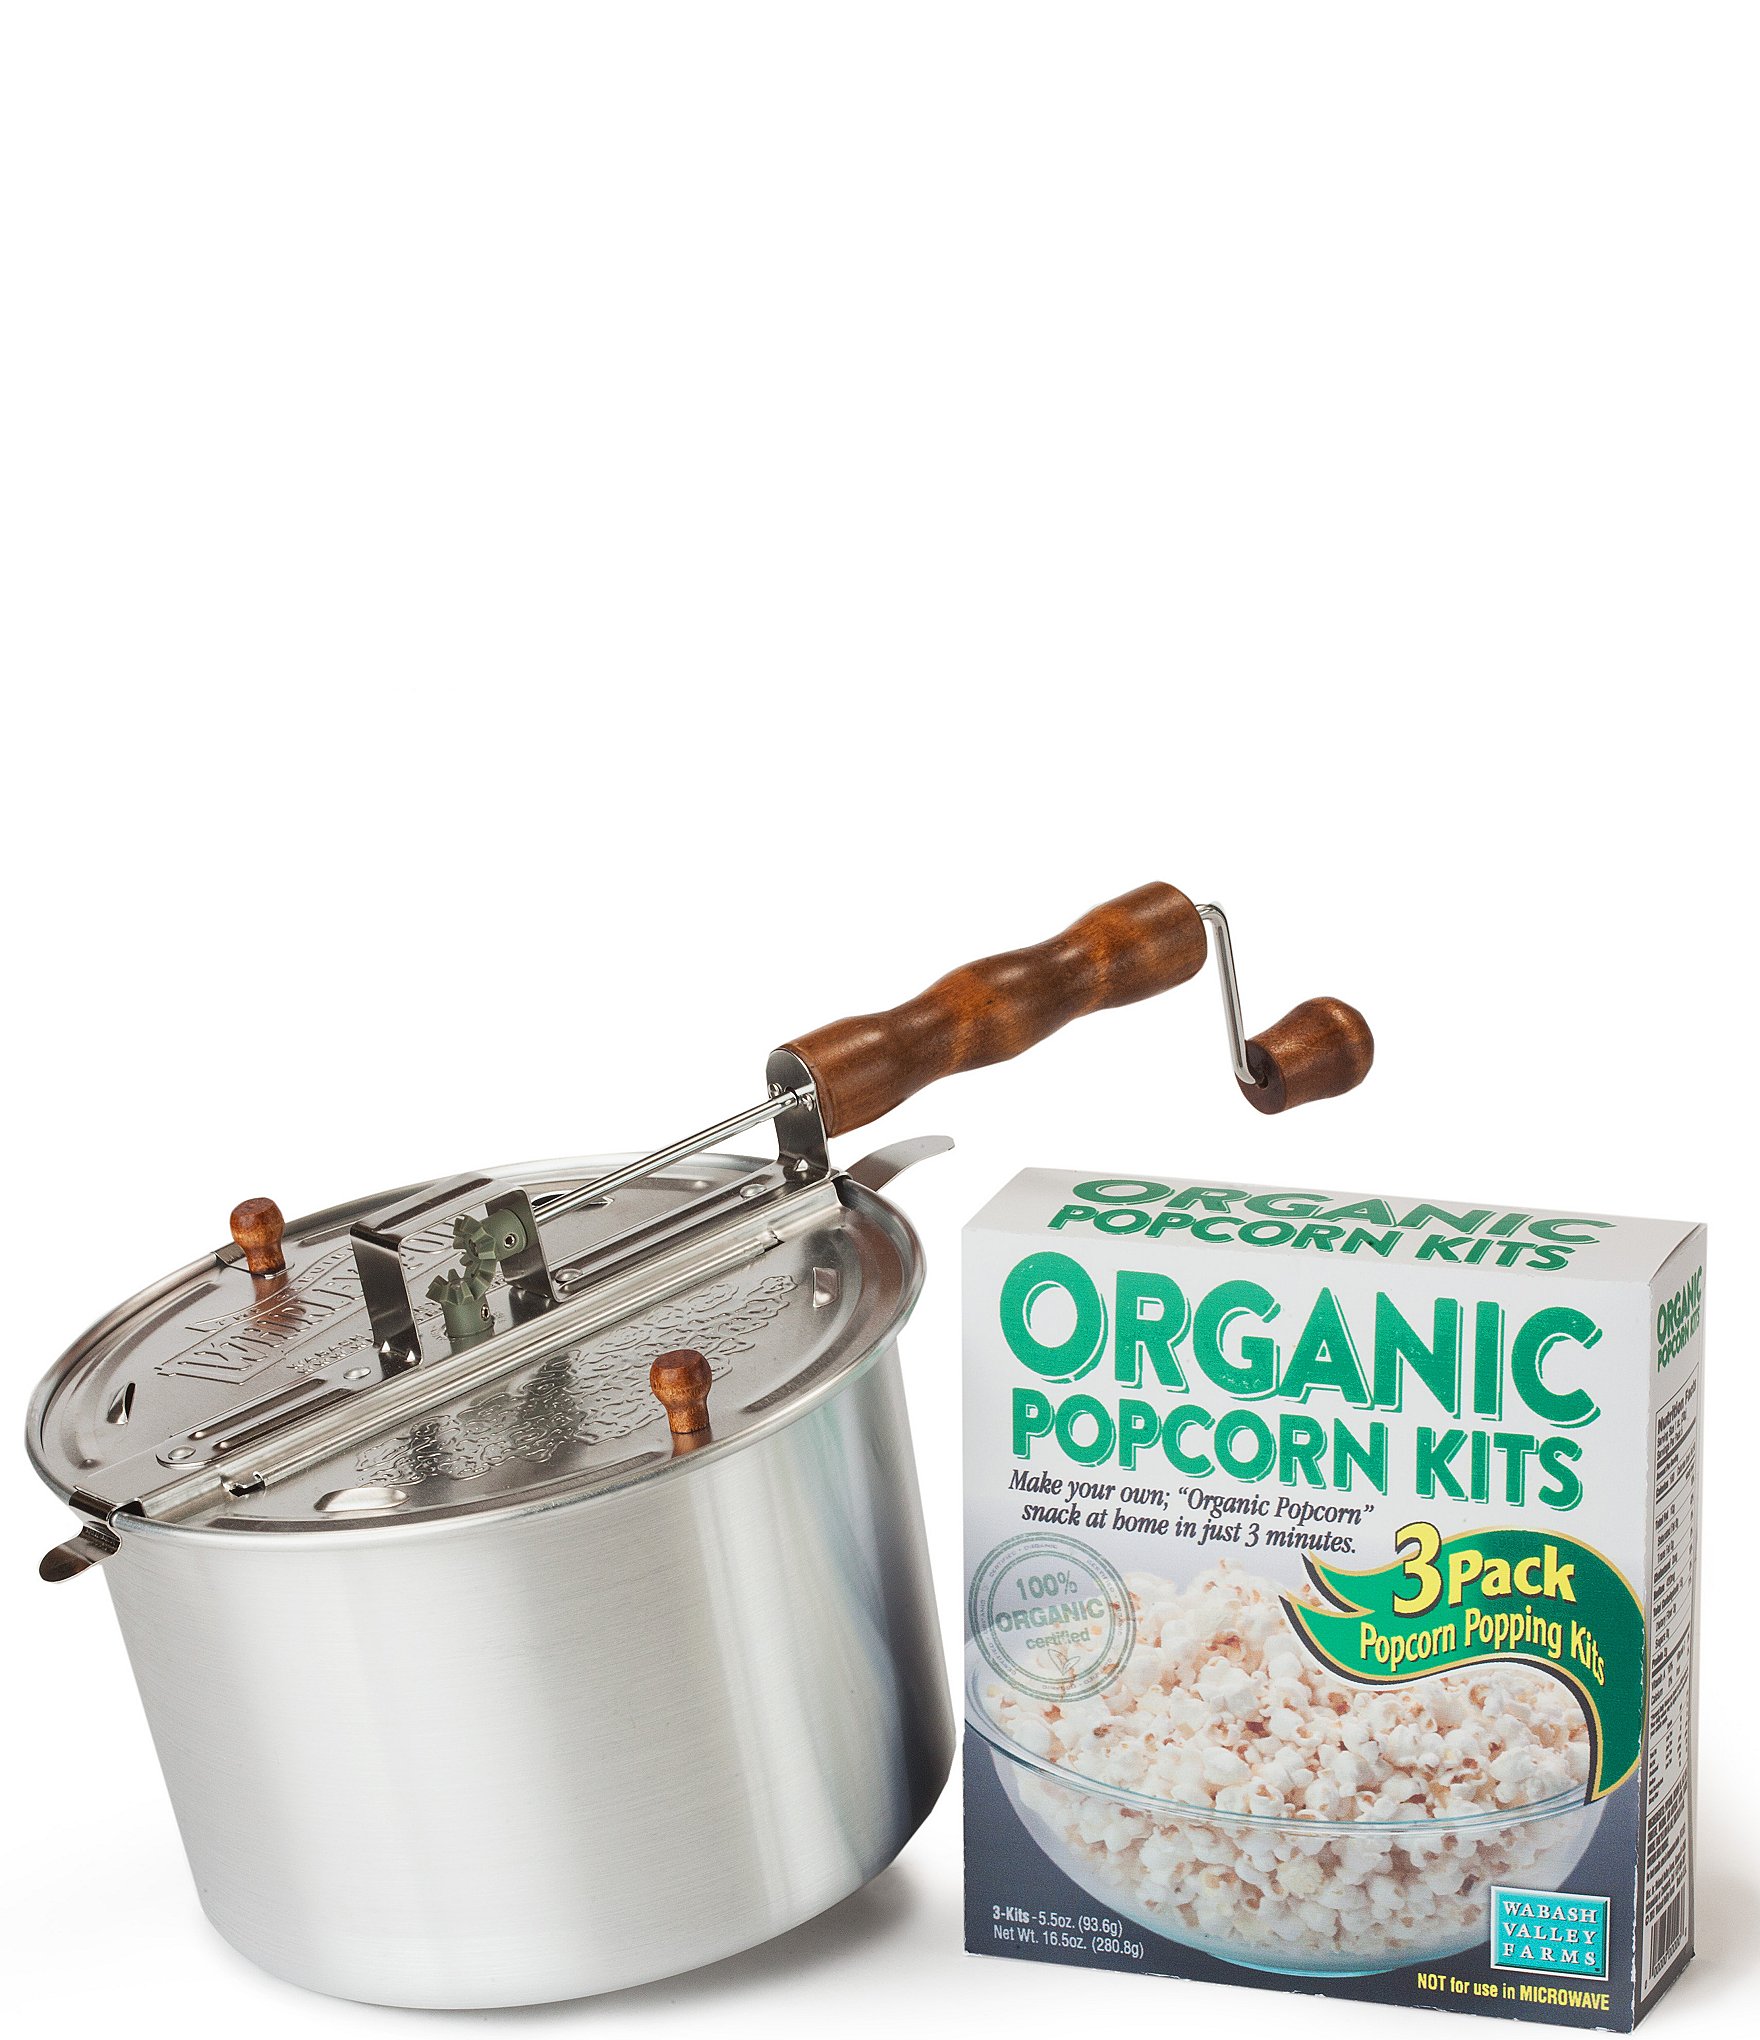 Stainless Steel 6-Qt. Stovetop Popcorn Popper + Reviews